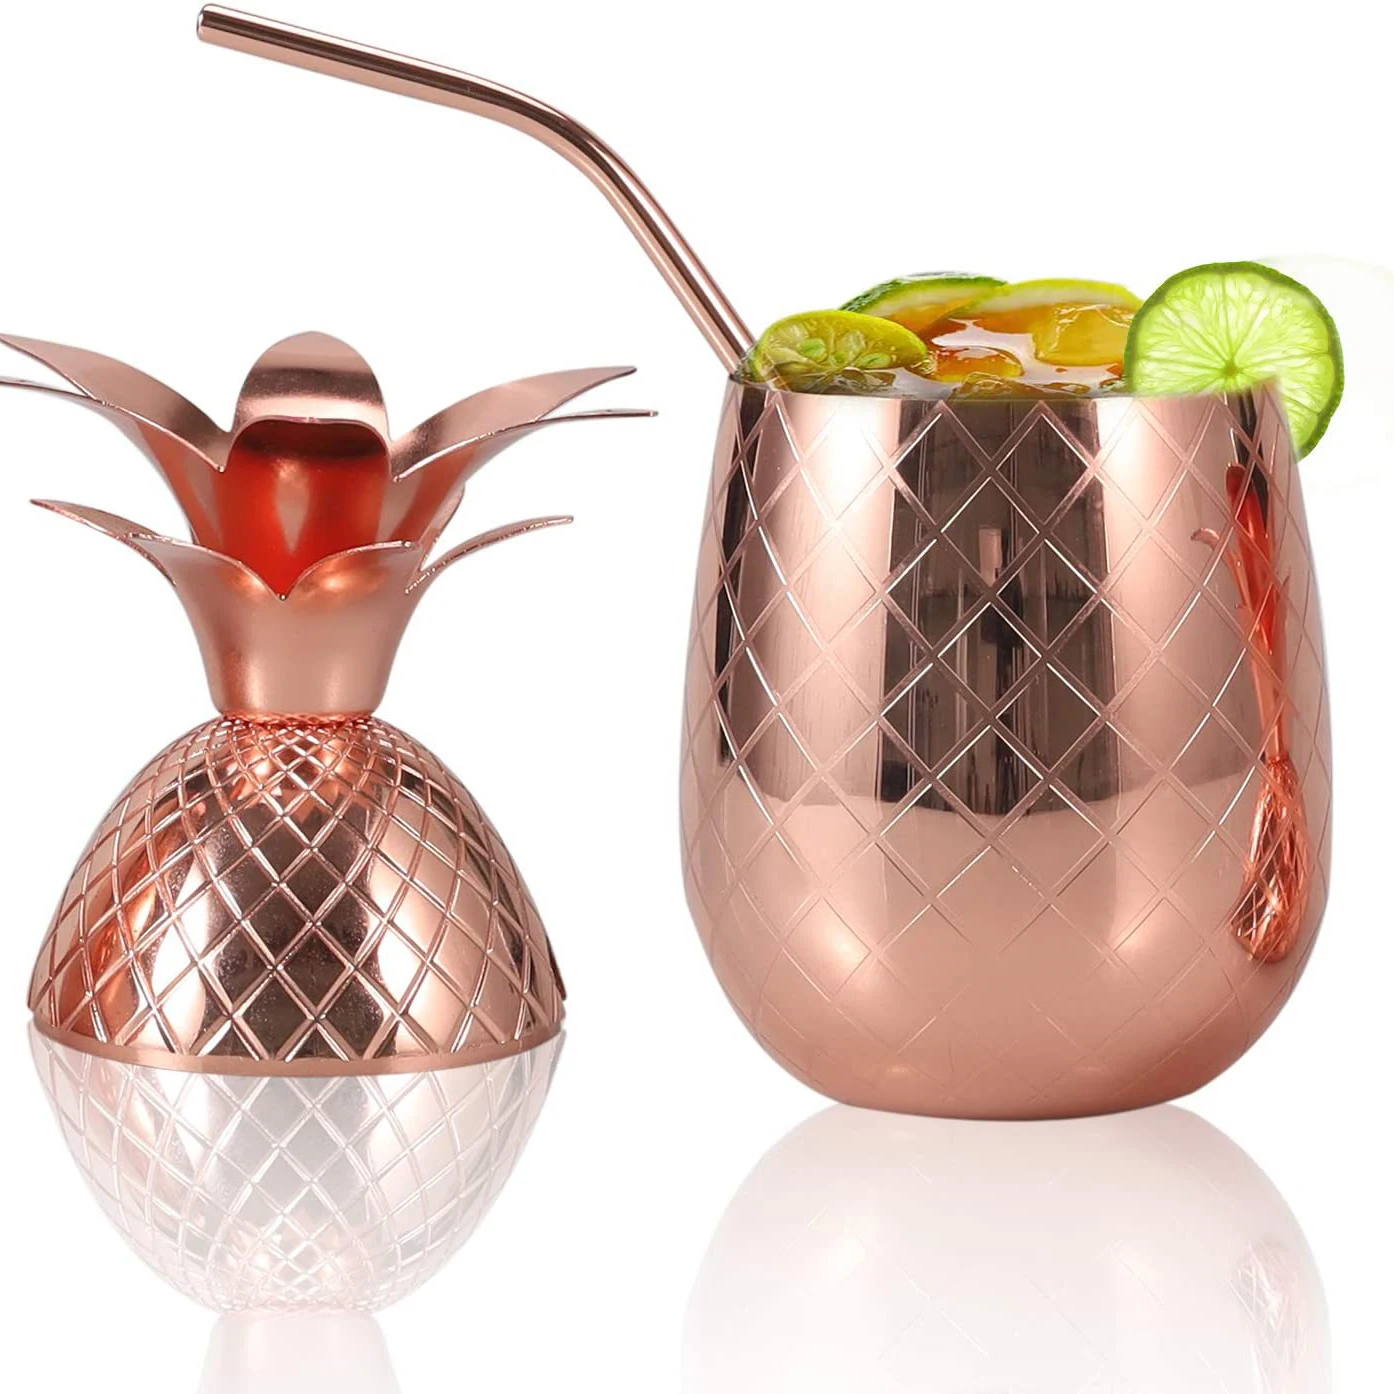 Pineapple Shape Moscow Mule Mug Cocktail Copper 16oz Coffee Milk Cup Drinkware with Lid Straw